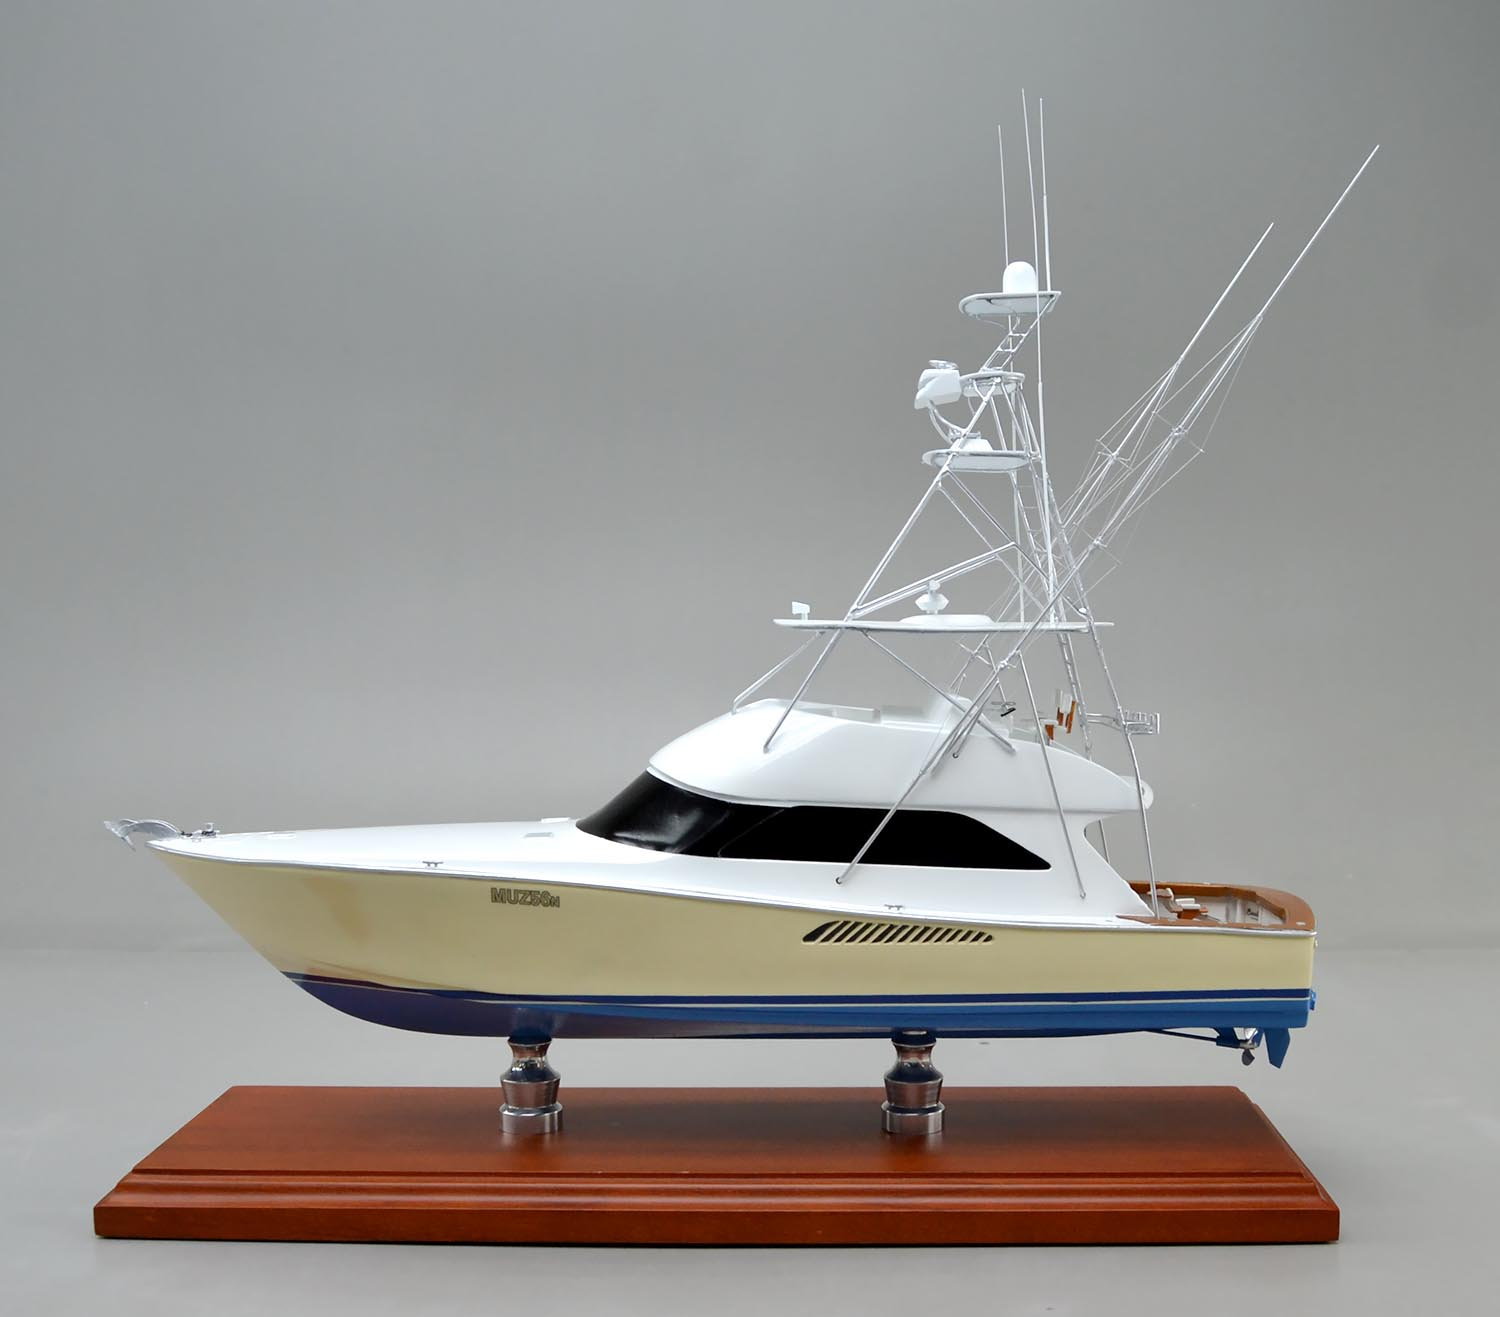 SD Model Makers offers made-to-order replica models of YOUR boat